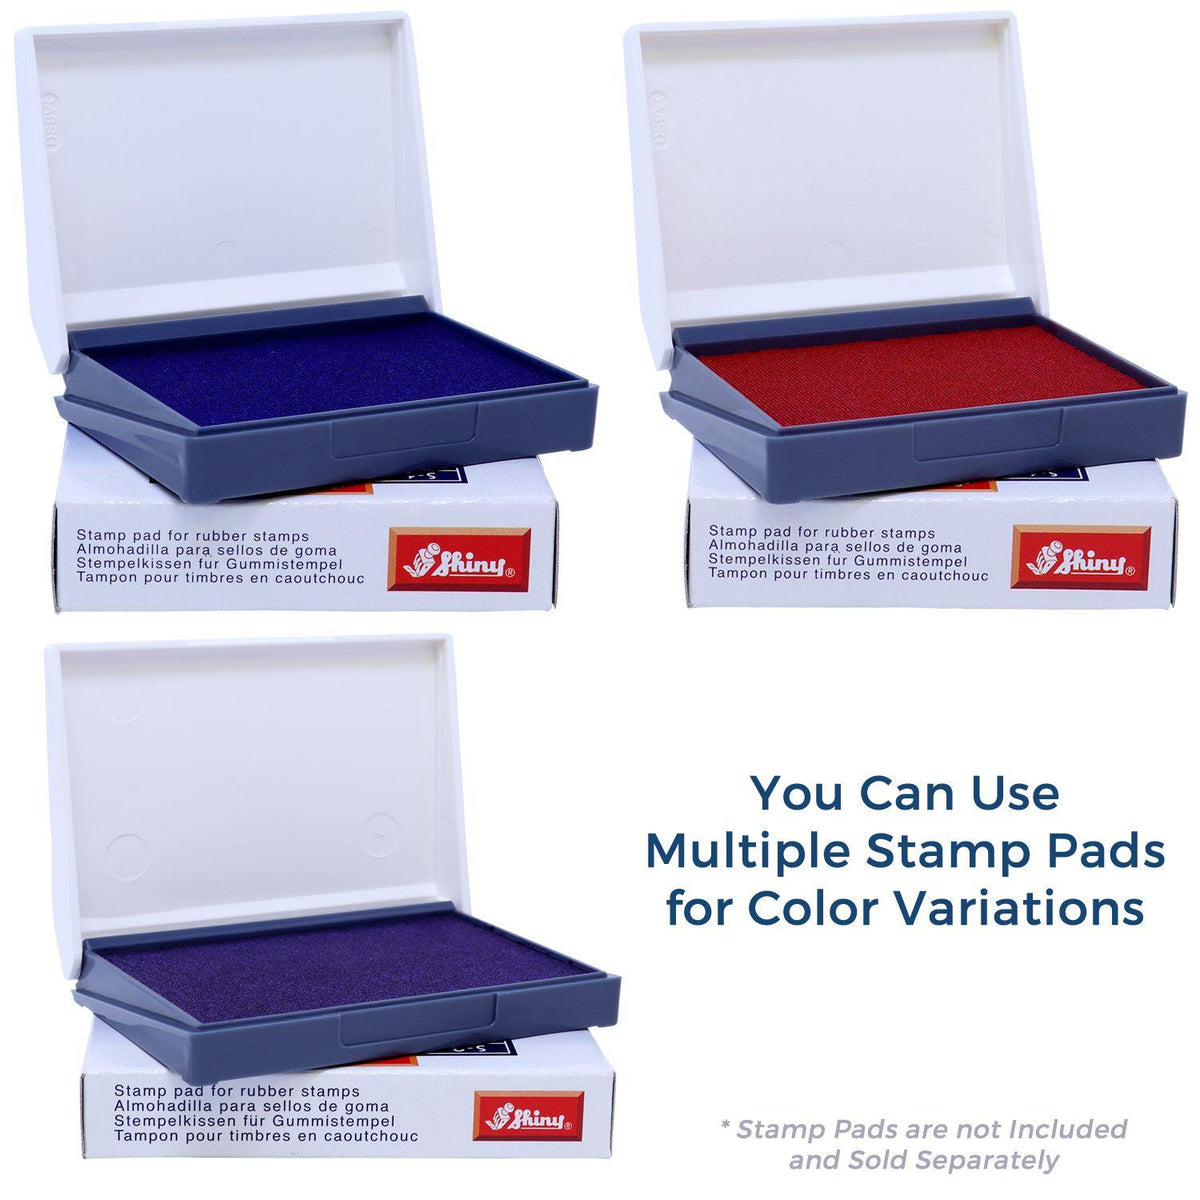 Stamp Pads for Large Formas Rubber Stamp Available